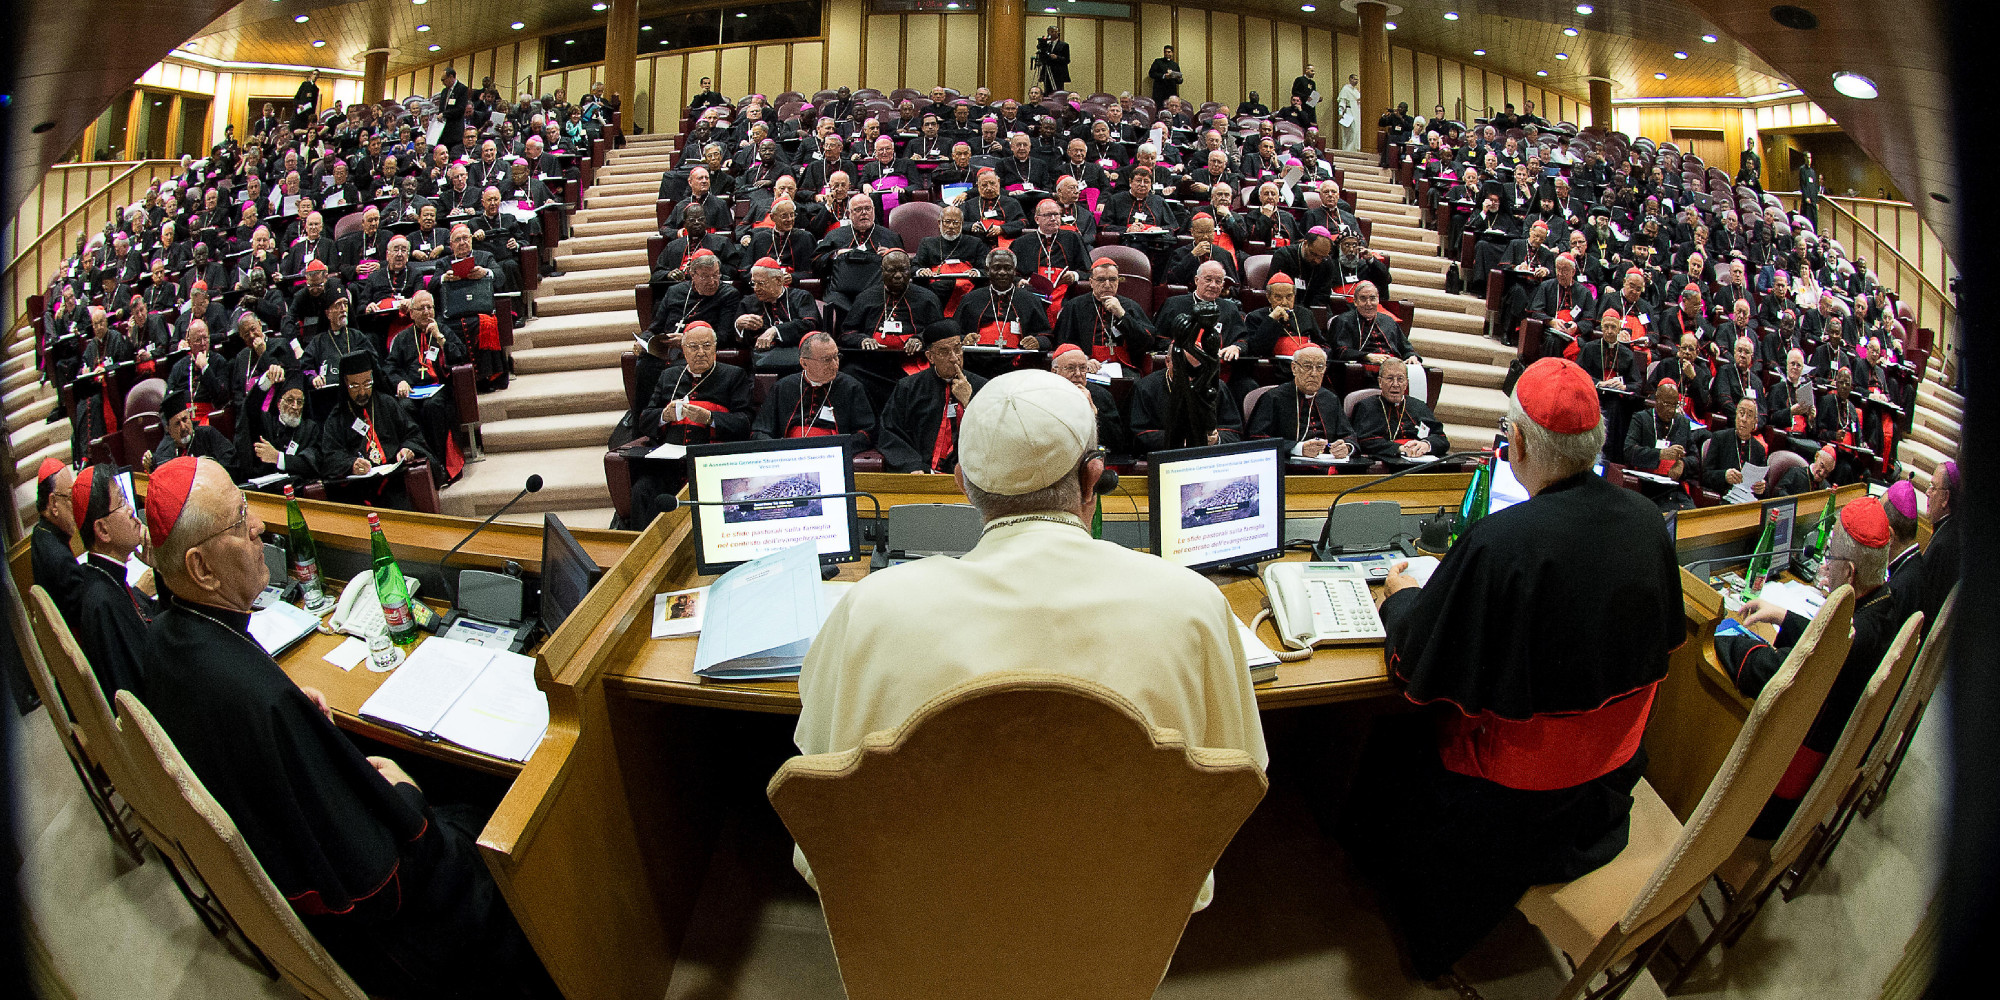 A handout picture released by the Vatican press office show Pope Francis (C) chairing an extraordinary synod of nearly 200 senior clerics in the Synod Aula at the Vatican on October 6, 2014. Pope Francis issued a strong signal of support for reform of the Catholic Church's approach to marriage, cohabitation and divorce as bishops gathered for a landmark review of teaching on the family. Thorny theological questions such as whether divorced and remarried believers should be able to receive communion will dominate two weeks of closed-door discussions set to pit conservative clerics against reformists. AFP PHOTO / OSSERVATORE ROMANO == RESTRICTED TO EDITORIAL USE - MANDATORY CREDIT "AFP PHOTO / OSSERVATORE ROMANO" - NO MARKETING NO ADVERTISING CAMPAIGNS - DISTRIBUTED AS A SERVICE TO CLIENTS ==